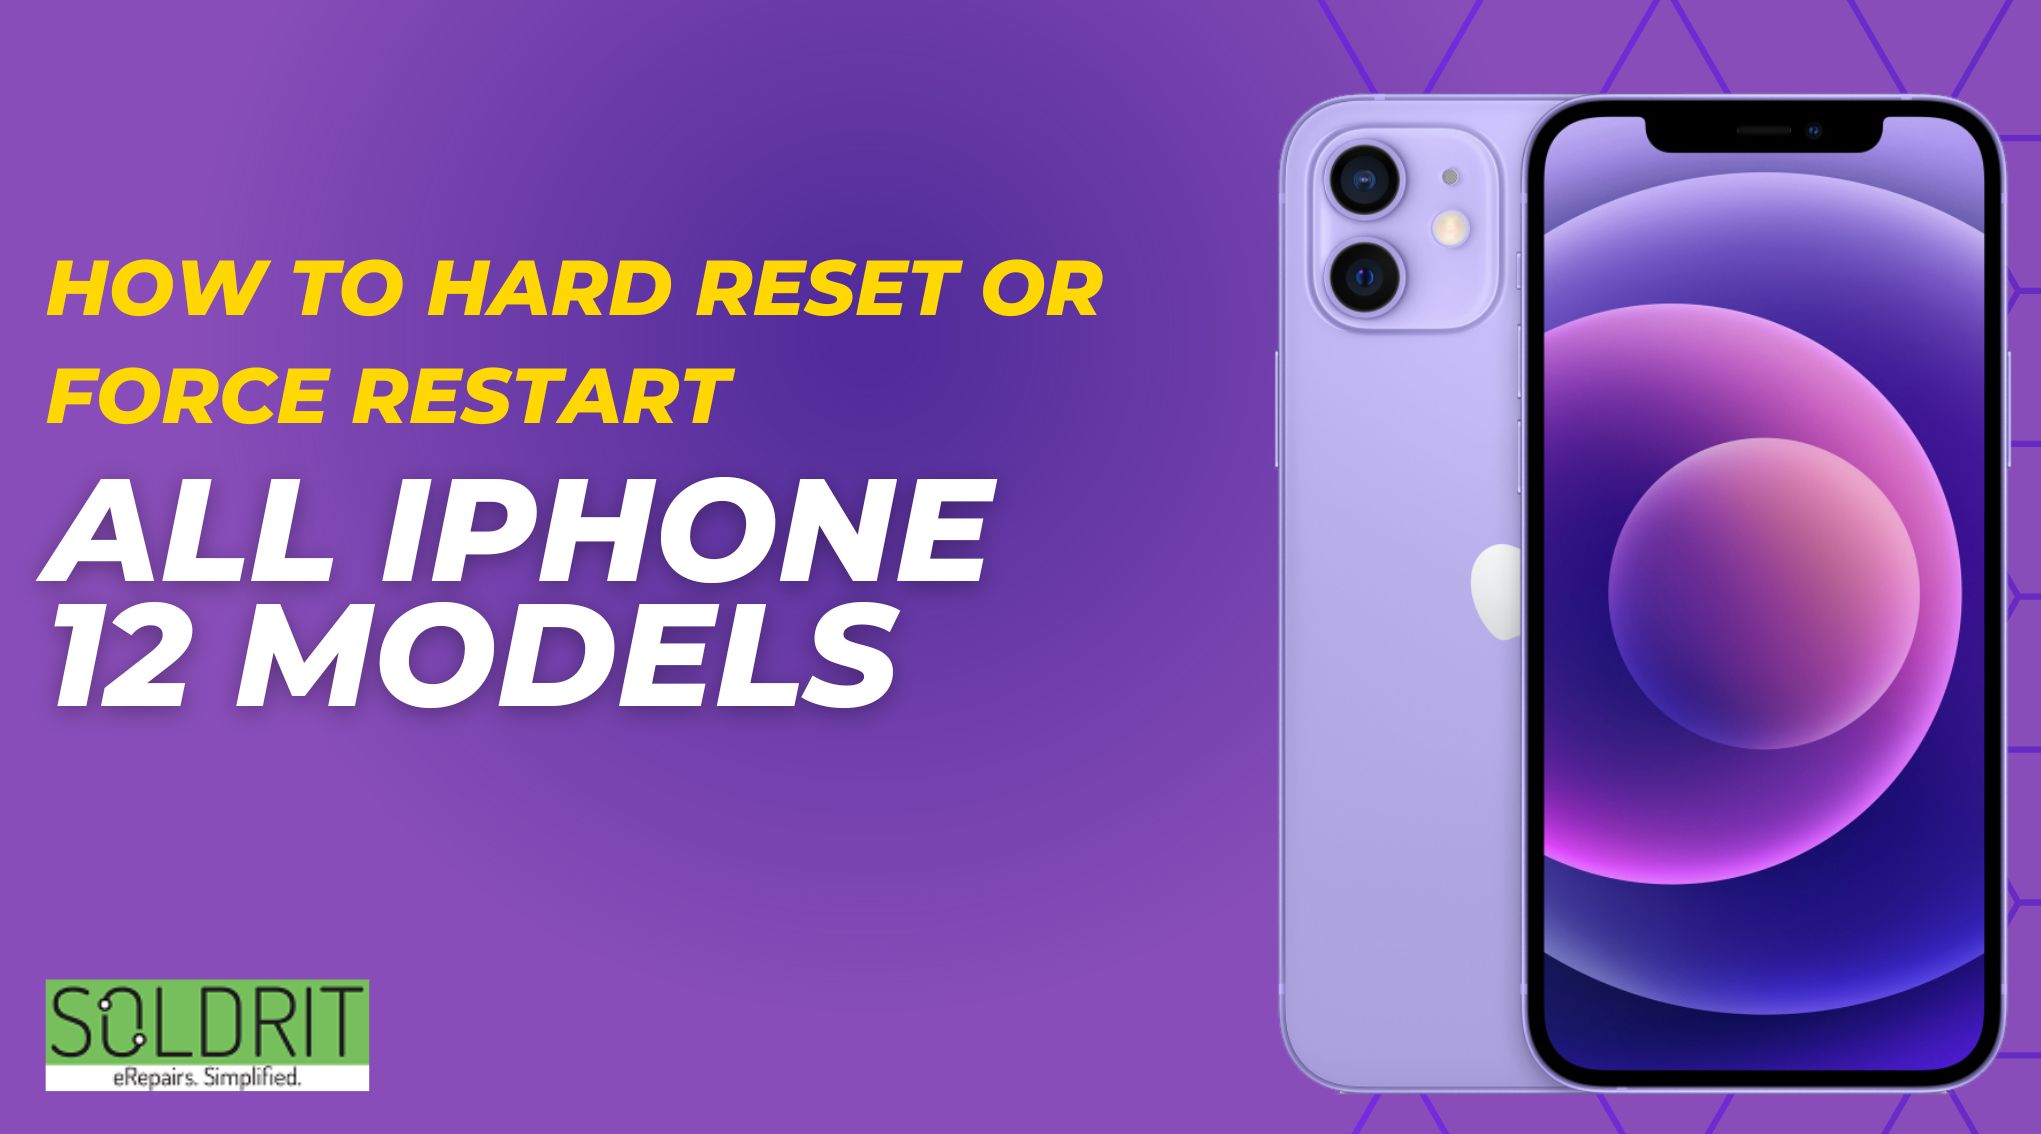 How To Hard Reset Or Force Restart All iPhone 12 Models?